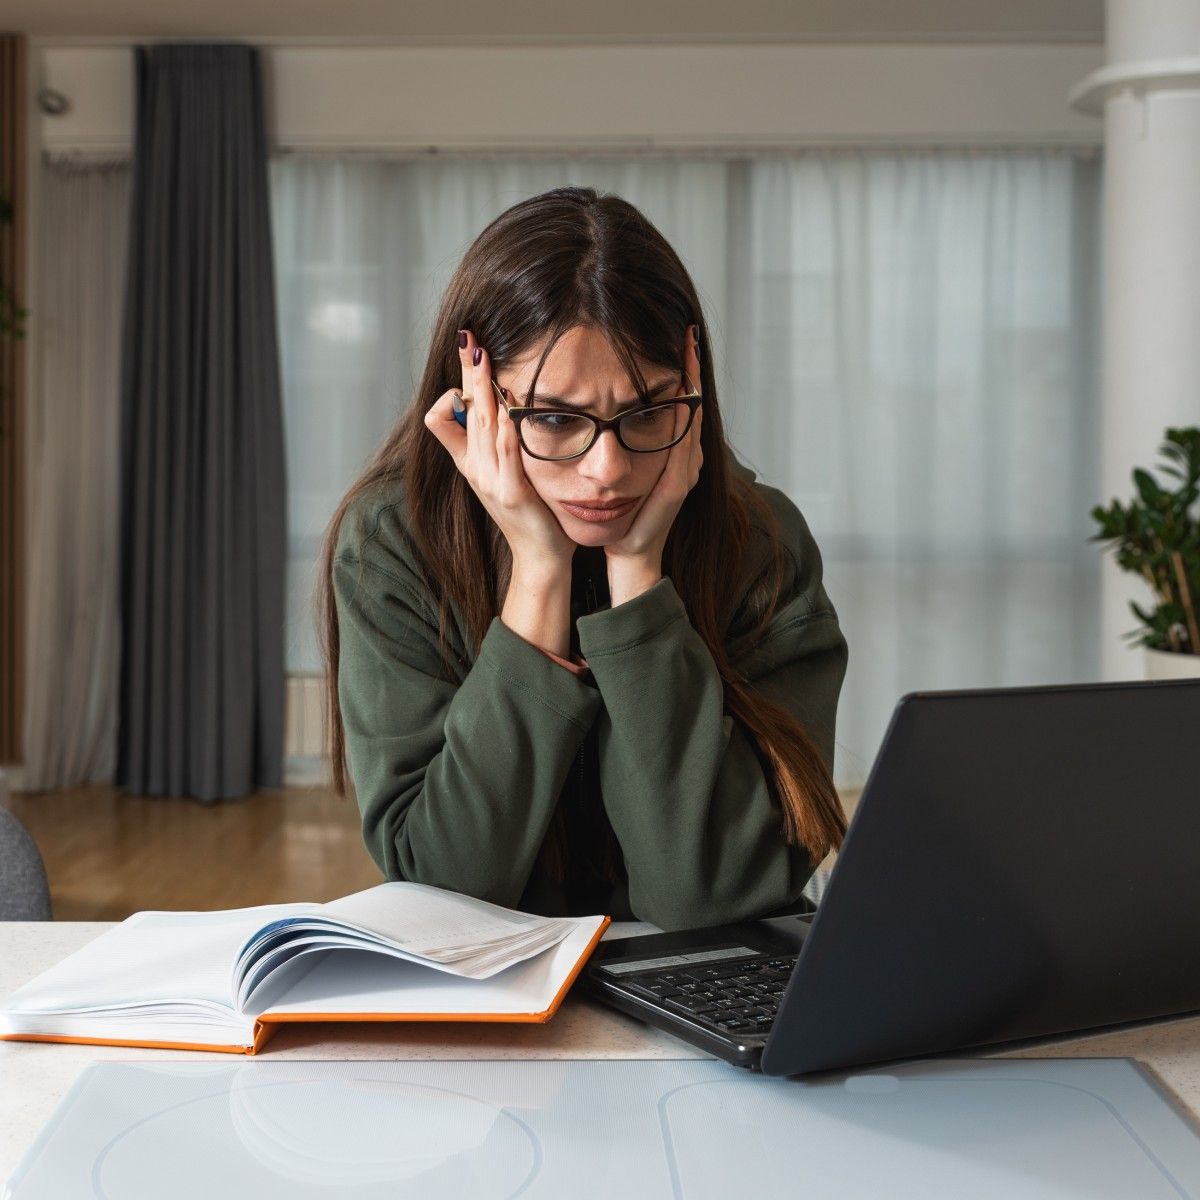 A young, dark-haired woman with glasses and a forest green sweatshirt holds her head in her hands and looks in frustration at her laptop.